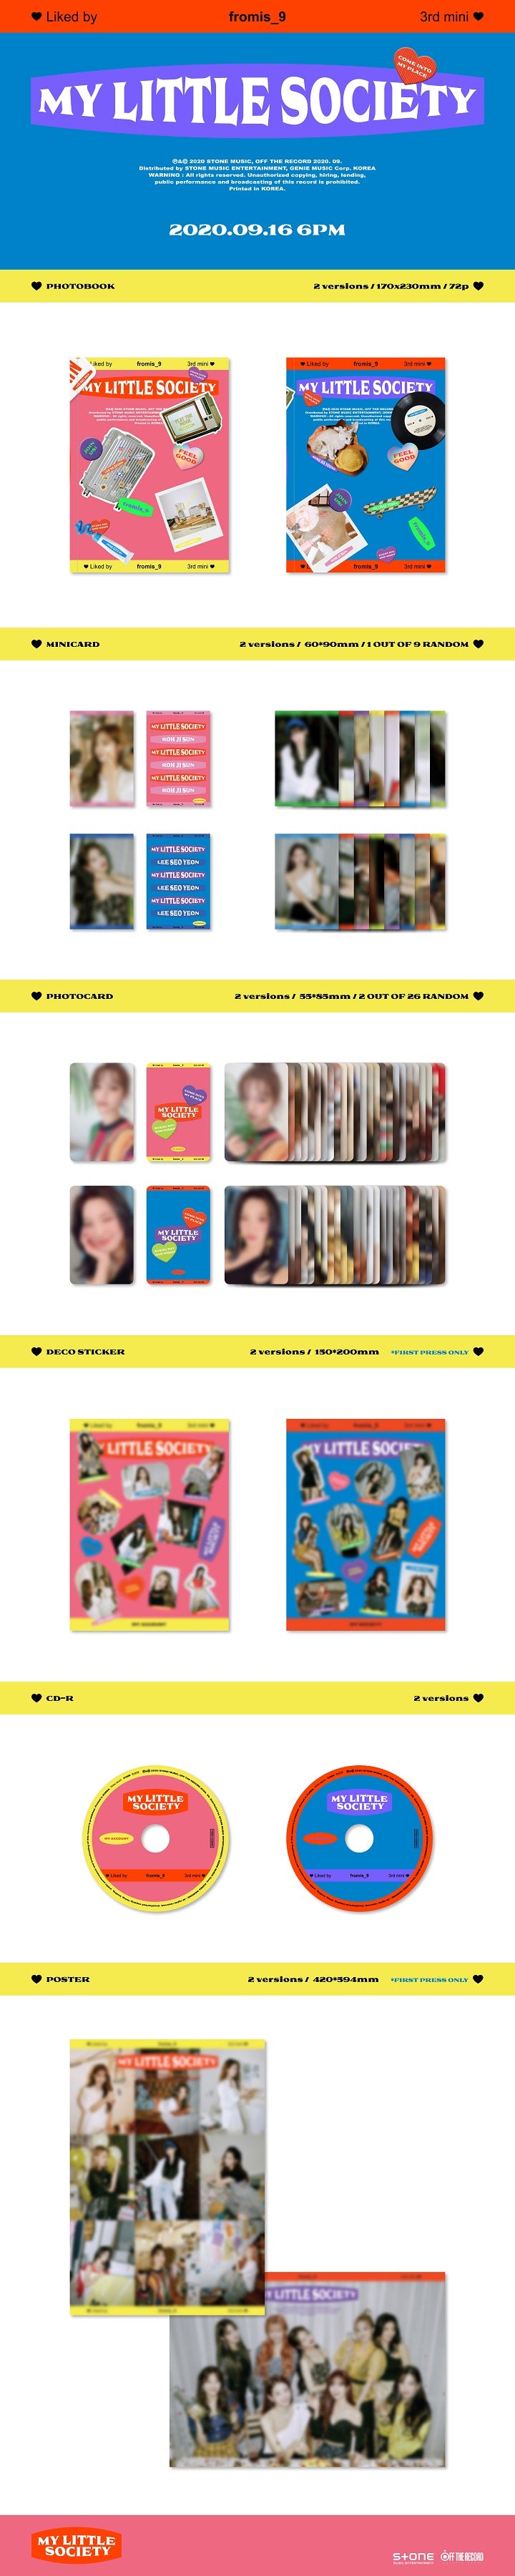 1 CD
1 Photo Book (72 pages)
1 Mini Card
2 Photo Cards